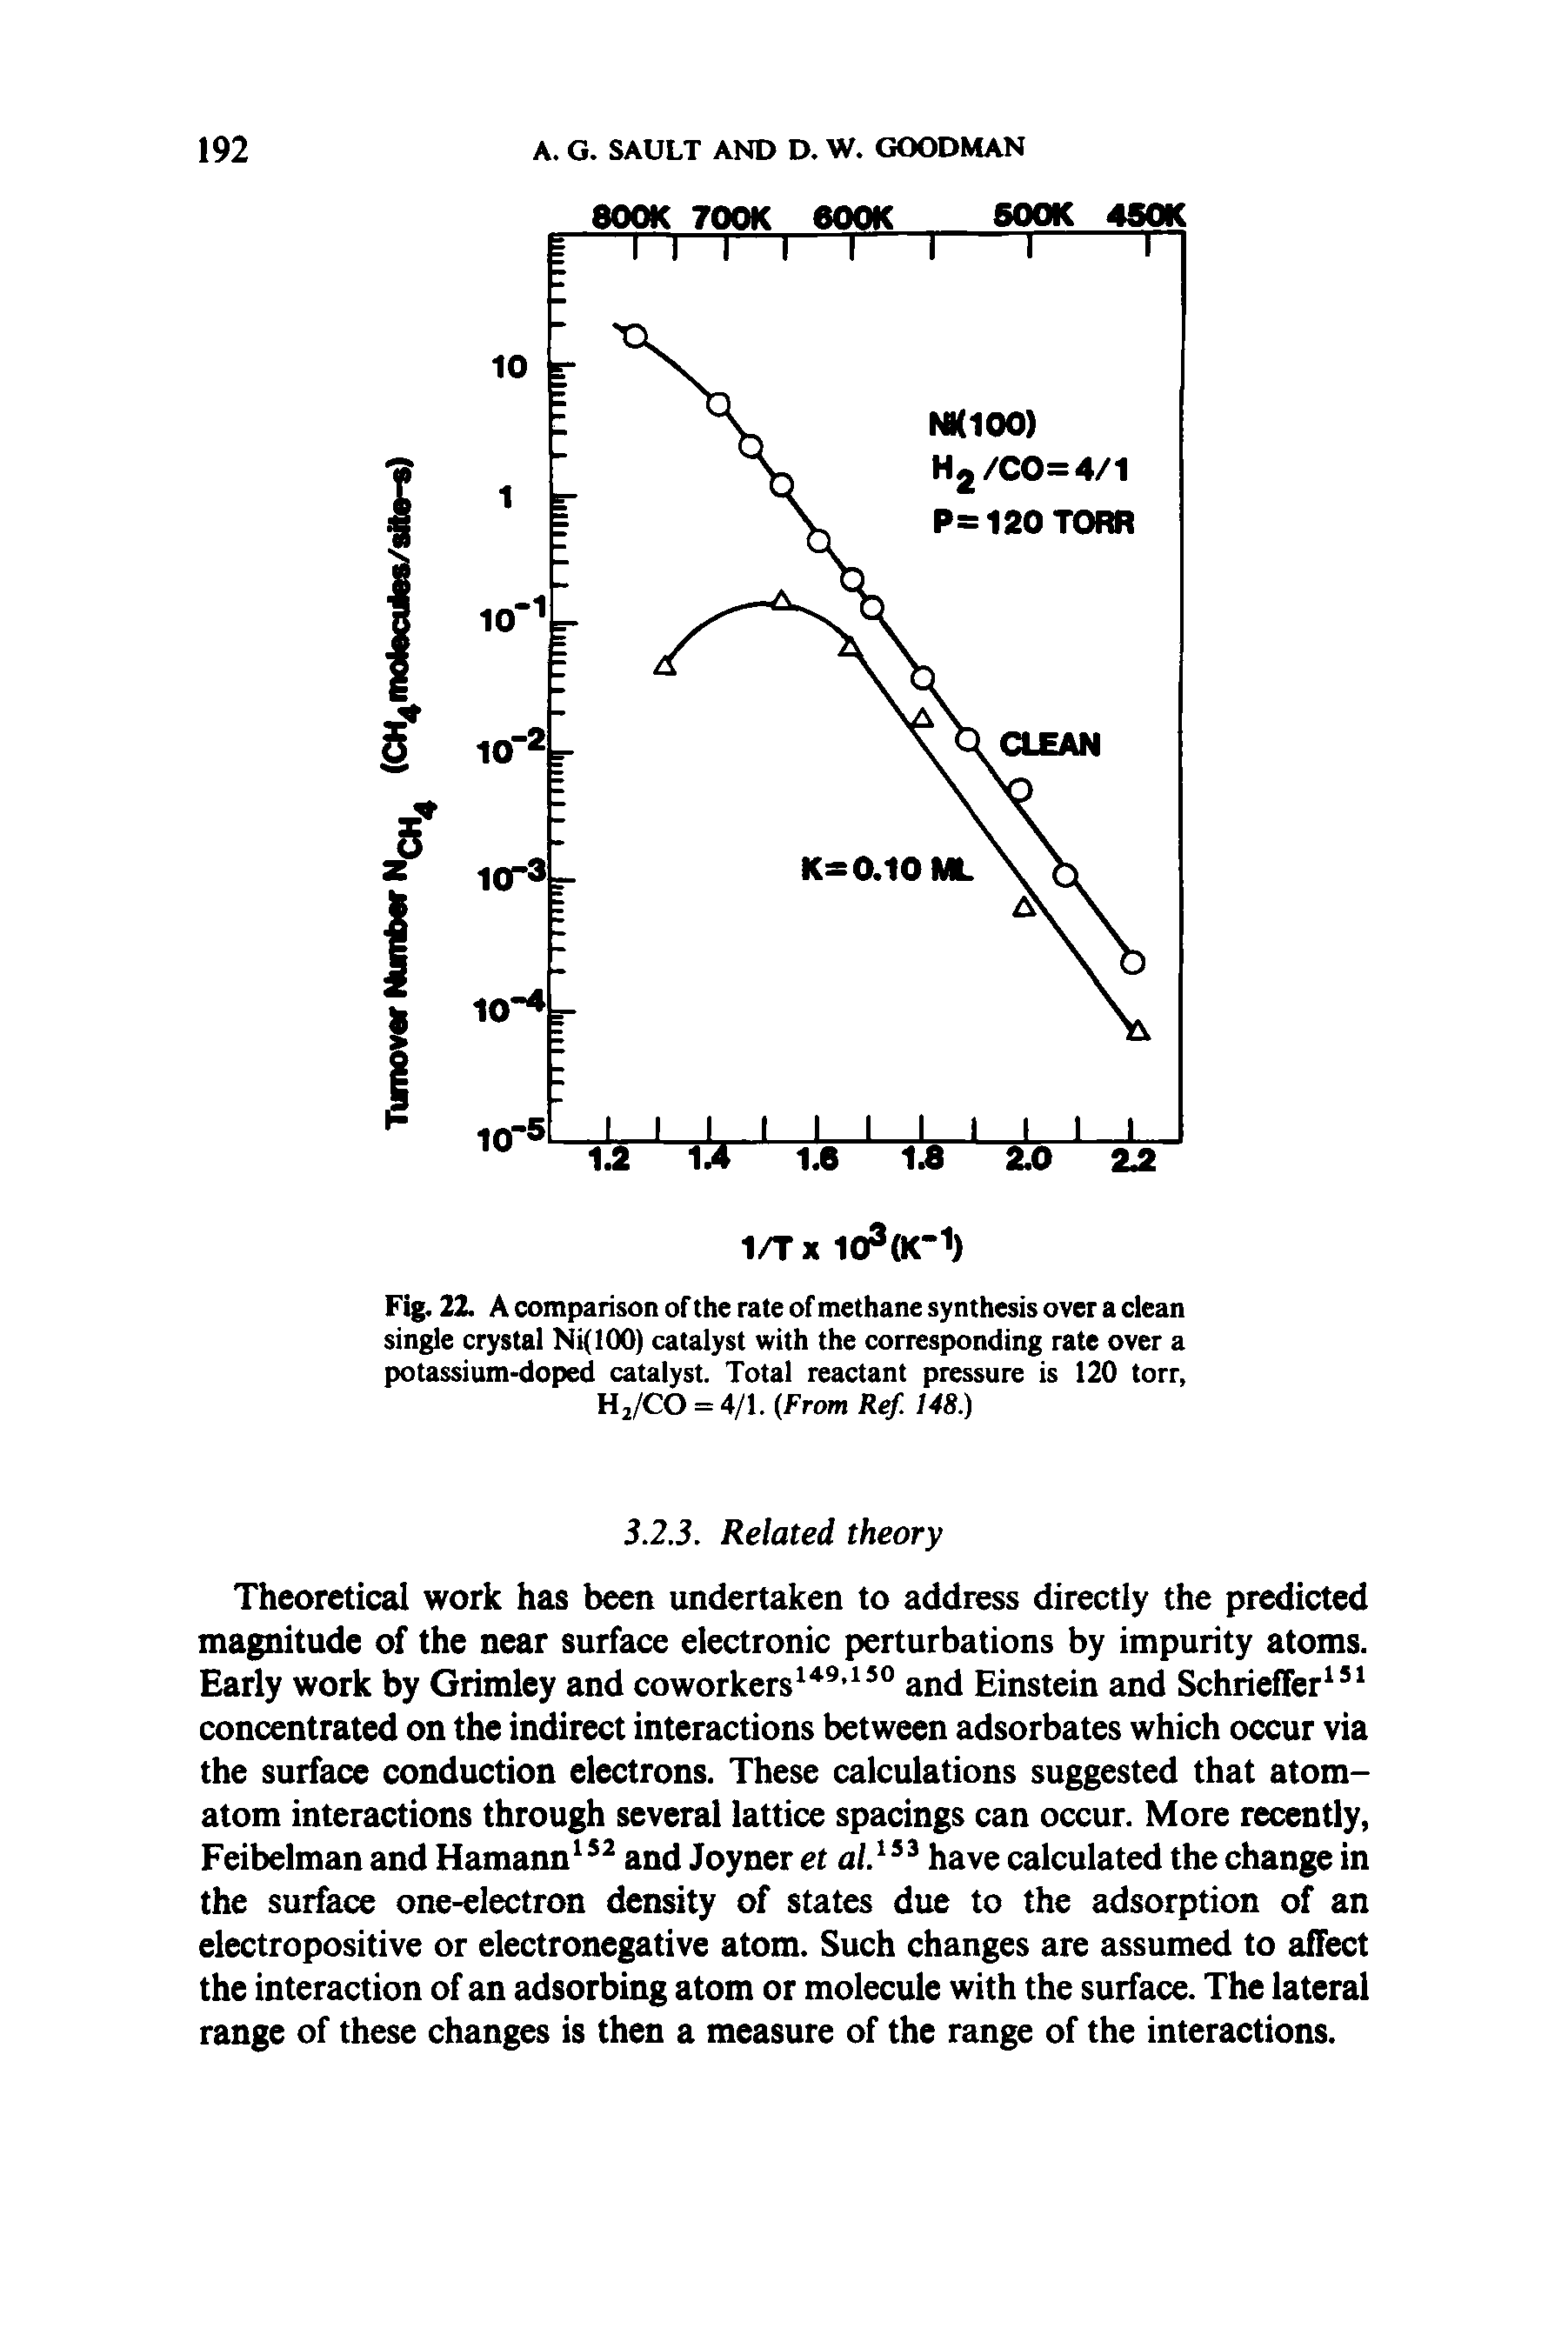 Fig. 22. A comparison of the rate of methane synthesis over a clean single crystal Ni(100) catalyst with the corresponding rate over a potassium-doped catalyst. Total reactant pressure is 120 torr, Hj/CO = 4/1. (From Ref. 148.)...